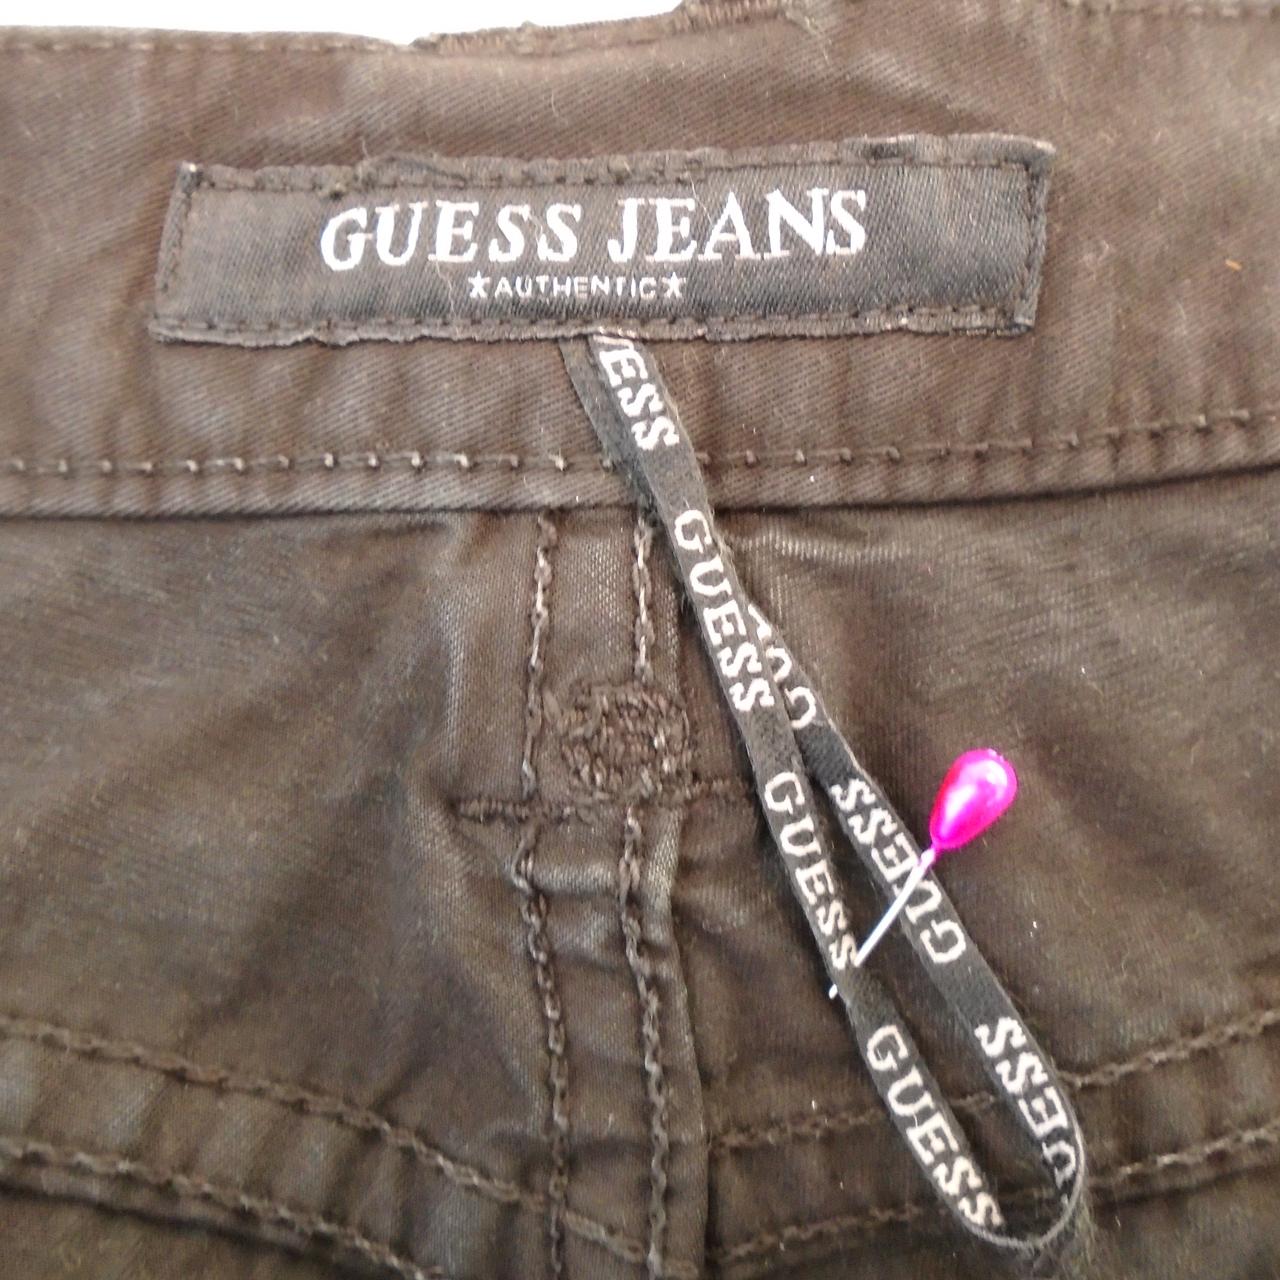 Women's Pants GUESS. Black. S. Used. Good